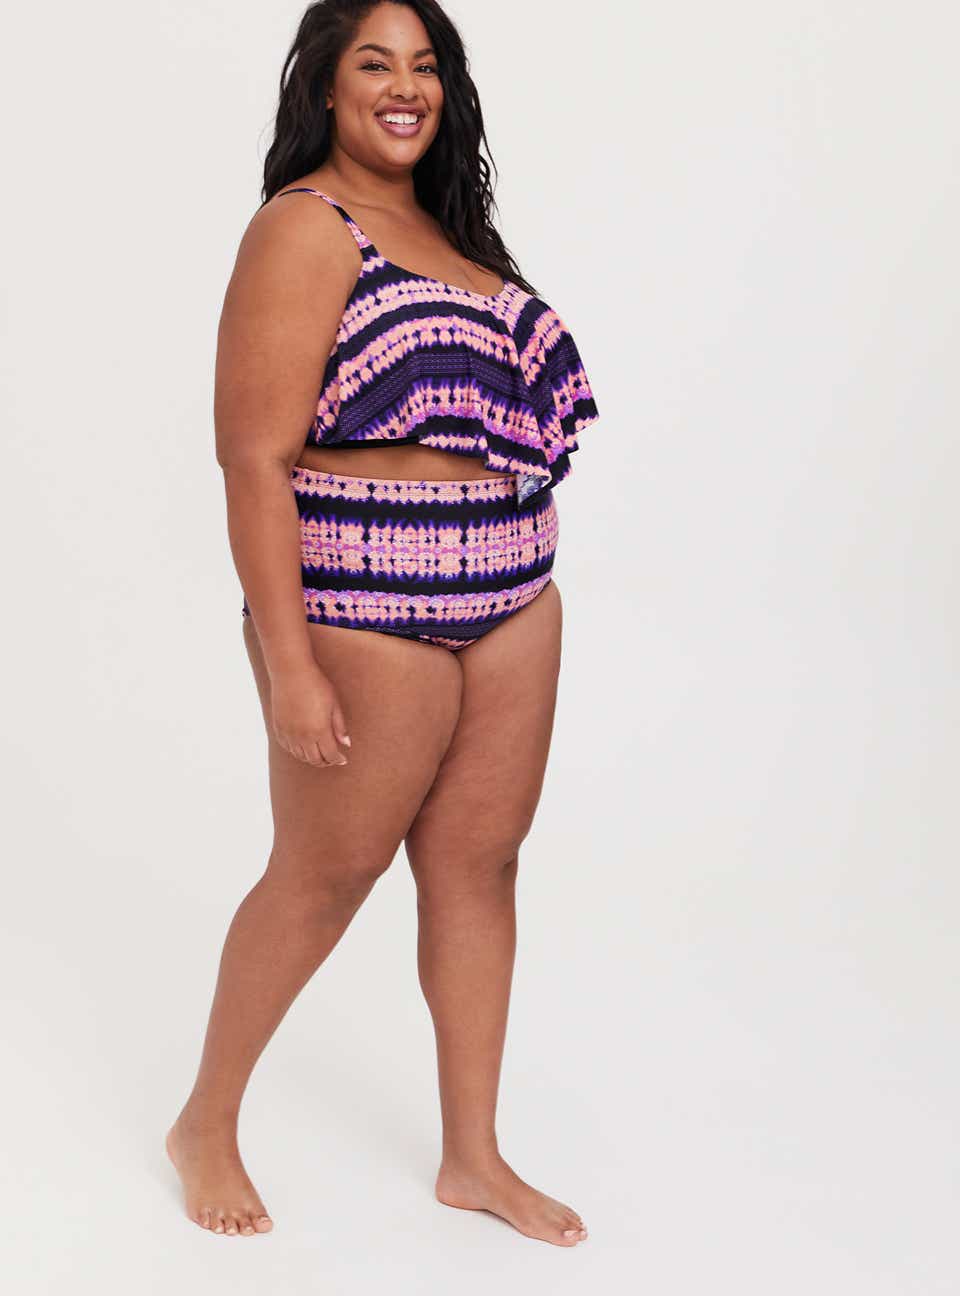 George Hanbury tunnel Perseus Best Plus-Size Bathing Suits & Bikinis Canada Shopping